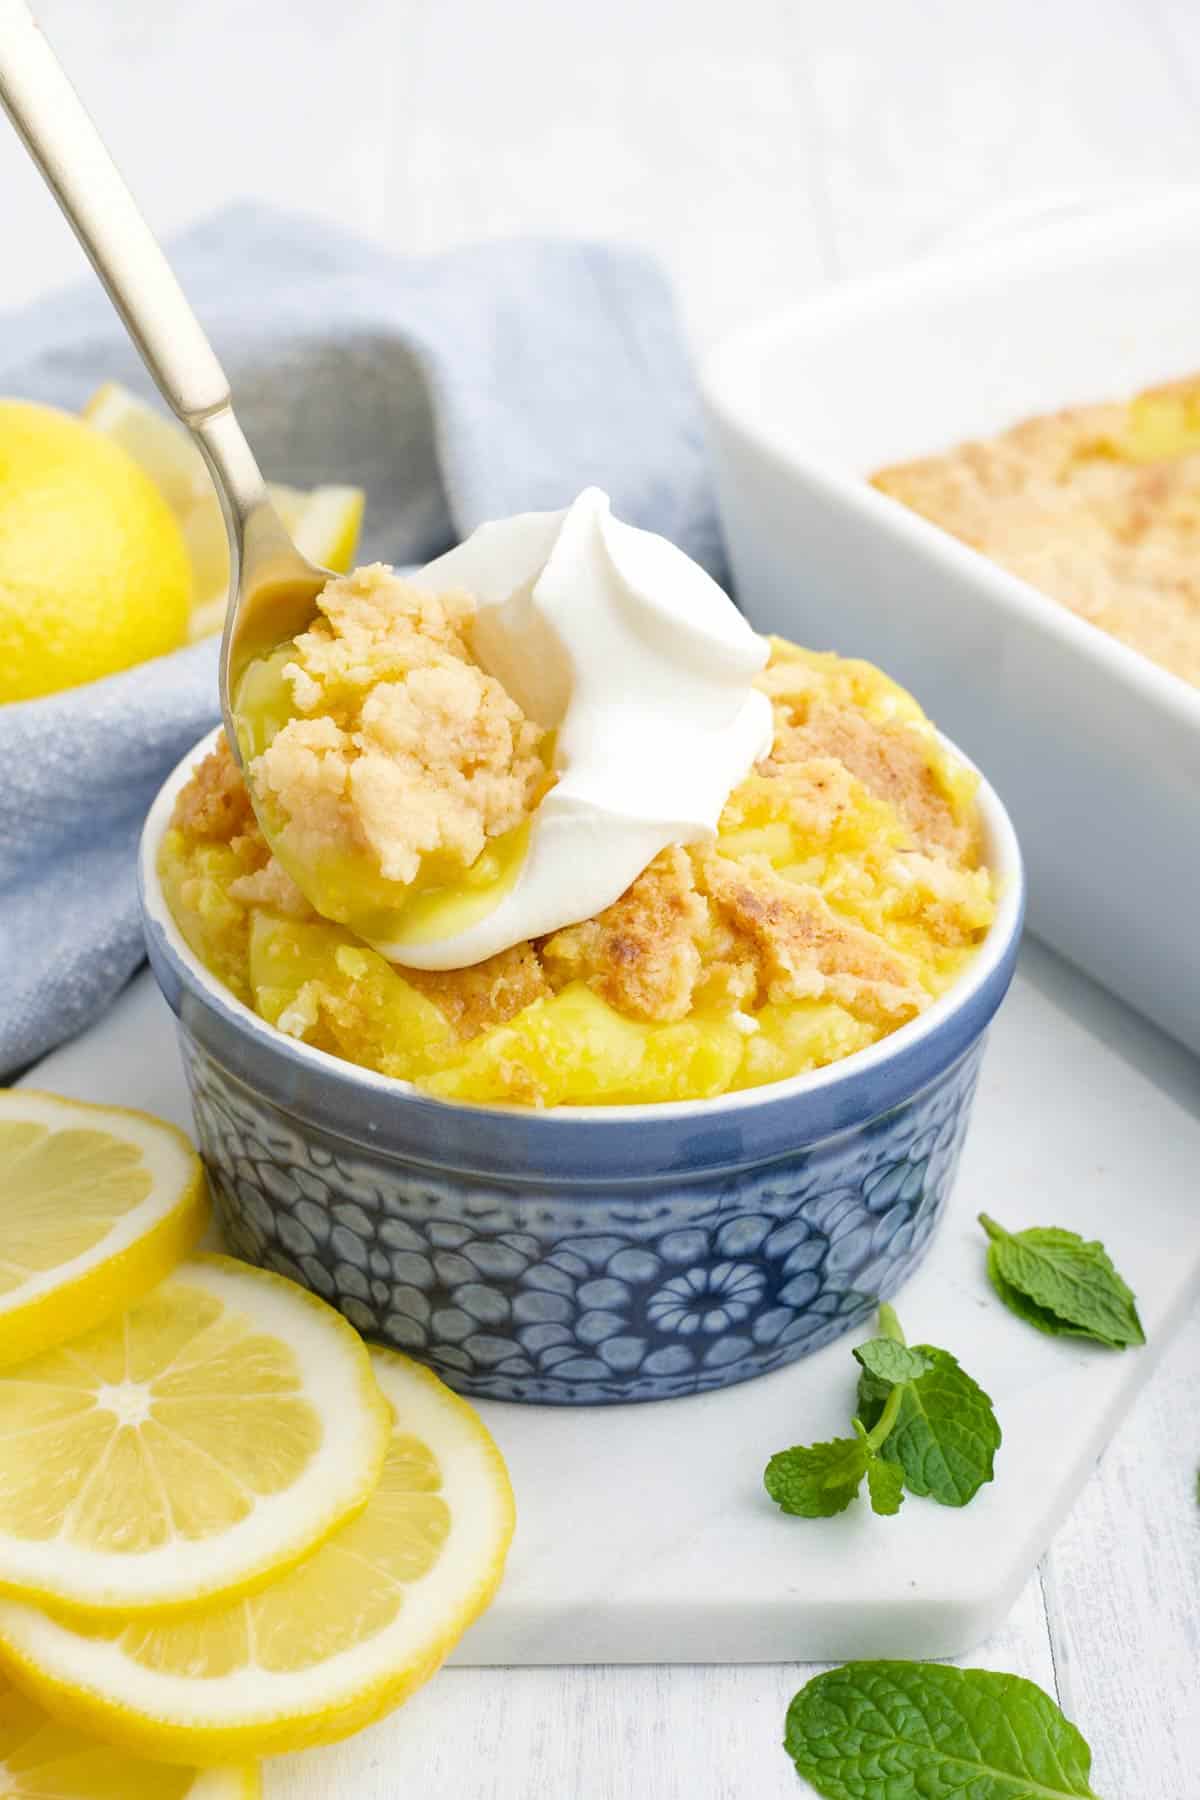 A spoon with a bite of lemon cake up over the bowl topped with whipped cream.